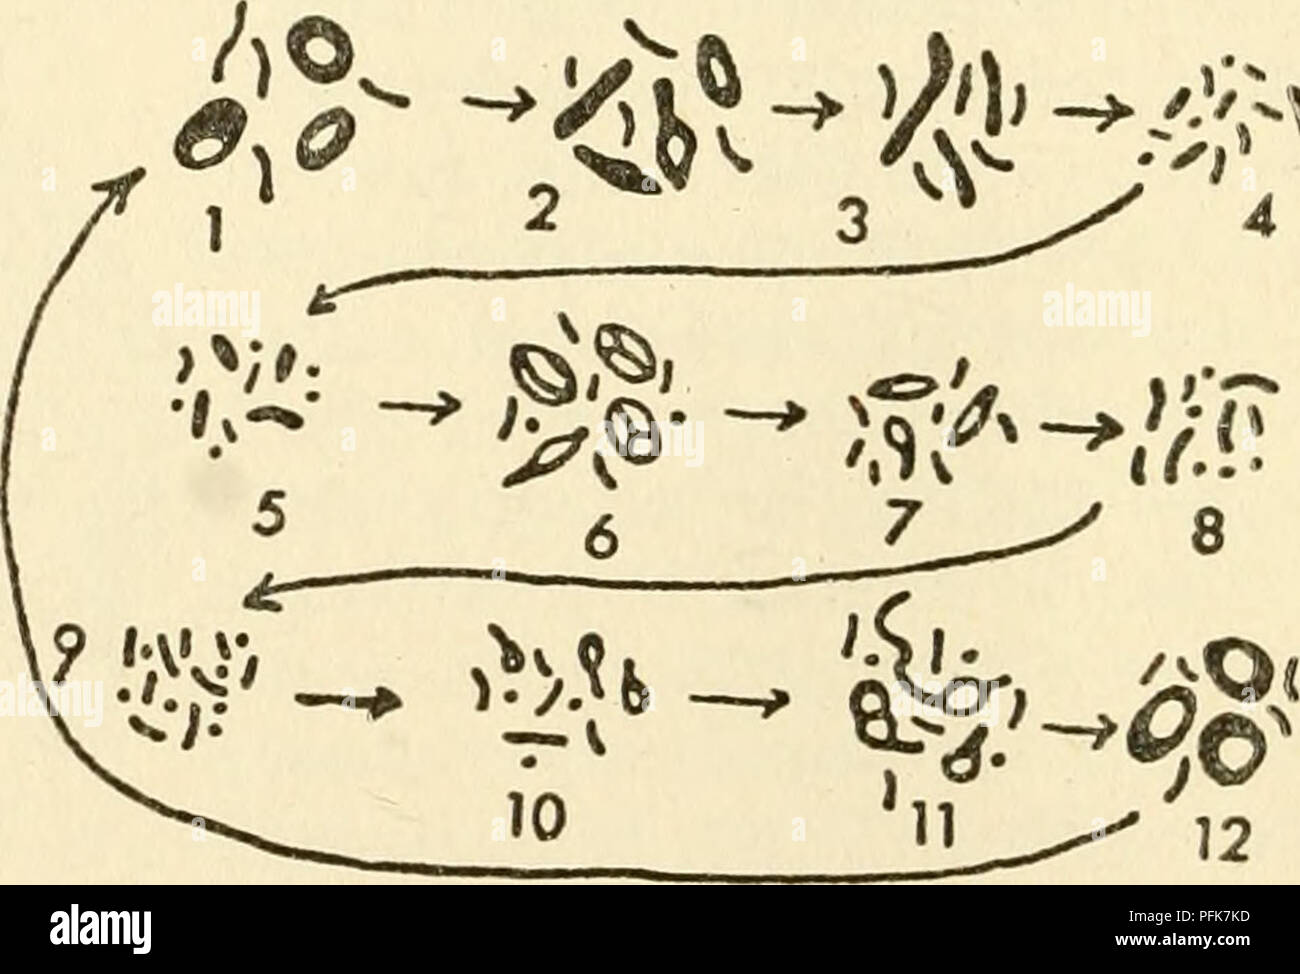 . The cytoplasm of the plant cell. Plant cells and tissues; Protoplasm. ? 3 ' ^-^ 4. Fig. 72 (left). — Chondriome of antherozoids of Adiantum capillus-Veneriii. 1, 2, antheridial initial. 3, 4, sperm mother cell. 5, 6, stages in the formatioQ of the antherozoid. Regaud's method. (After Emberger). Fig. 73 (right). — Behavior of the chondriome during the life cycle of a fern, I. leaf; starch-forming chloroplasts and chondriosomes. 2-3, formation of spores: decreasing activity of plastids. 4, spore mother cells; inactive plastids indistinguish- able from chondriosomes. 5, mature spore; plastids b Stock Photo